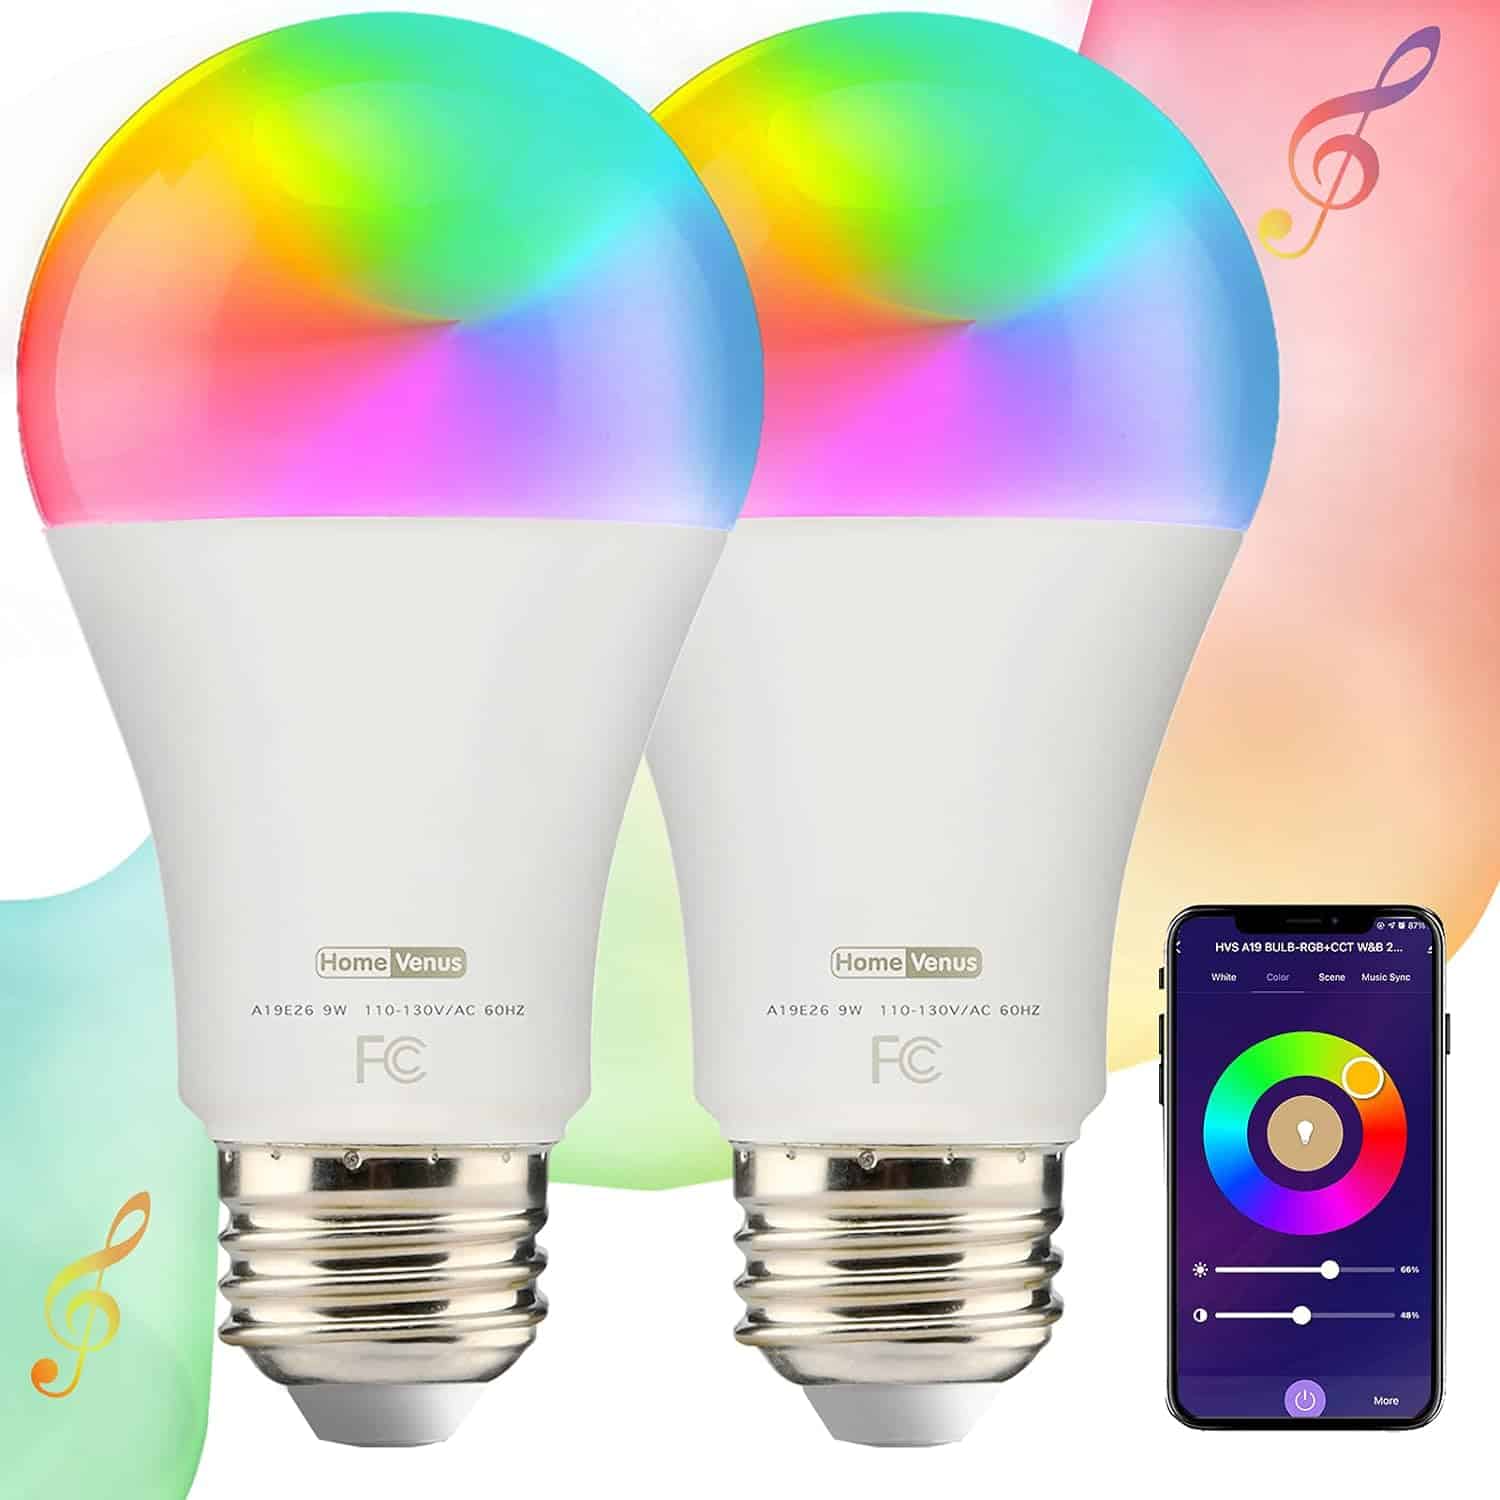 Homevenus HVS Smart Light Bulbs, 9W Equivalent 60W A19 E26 RGBW Music Sync Color Changing LED Light Bulbs, App 2.4GHz WiFi Dimmable Tunable White Work with Alexa Google Assistant, 4 Pack